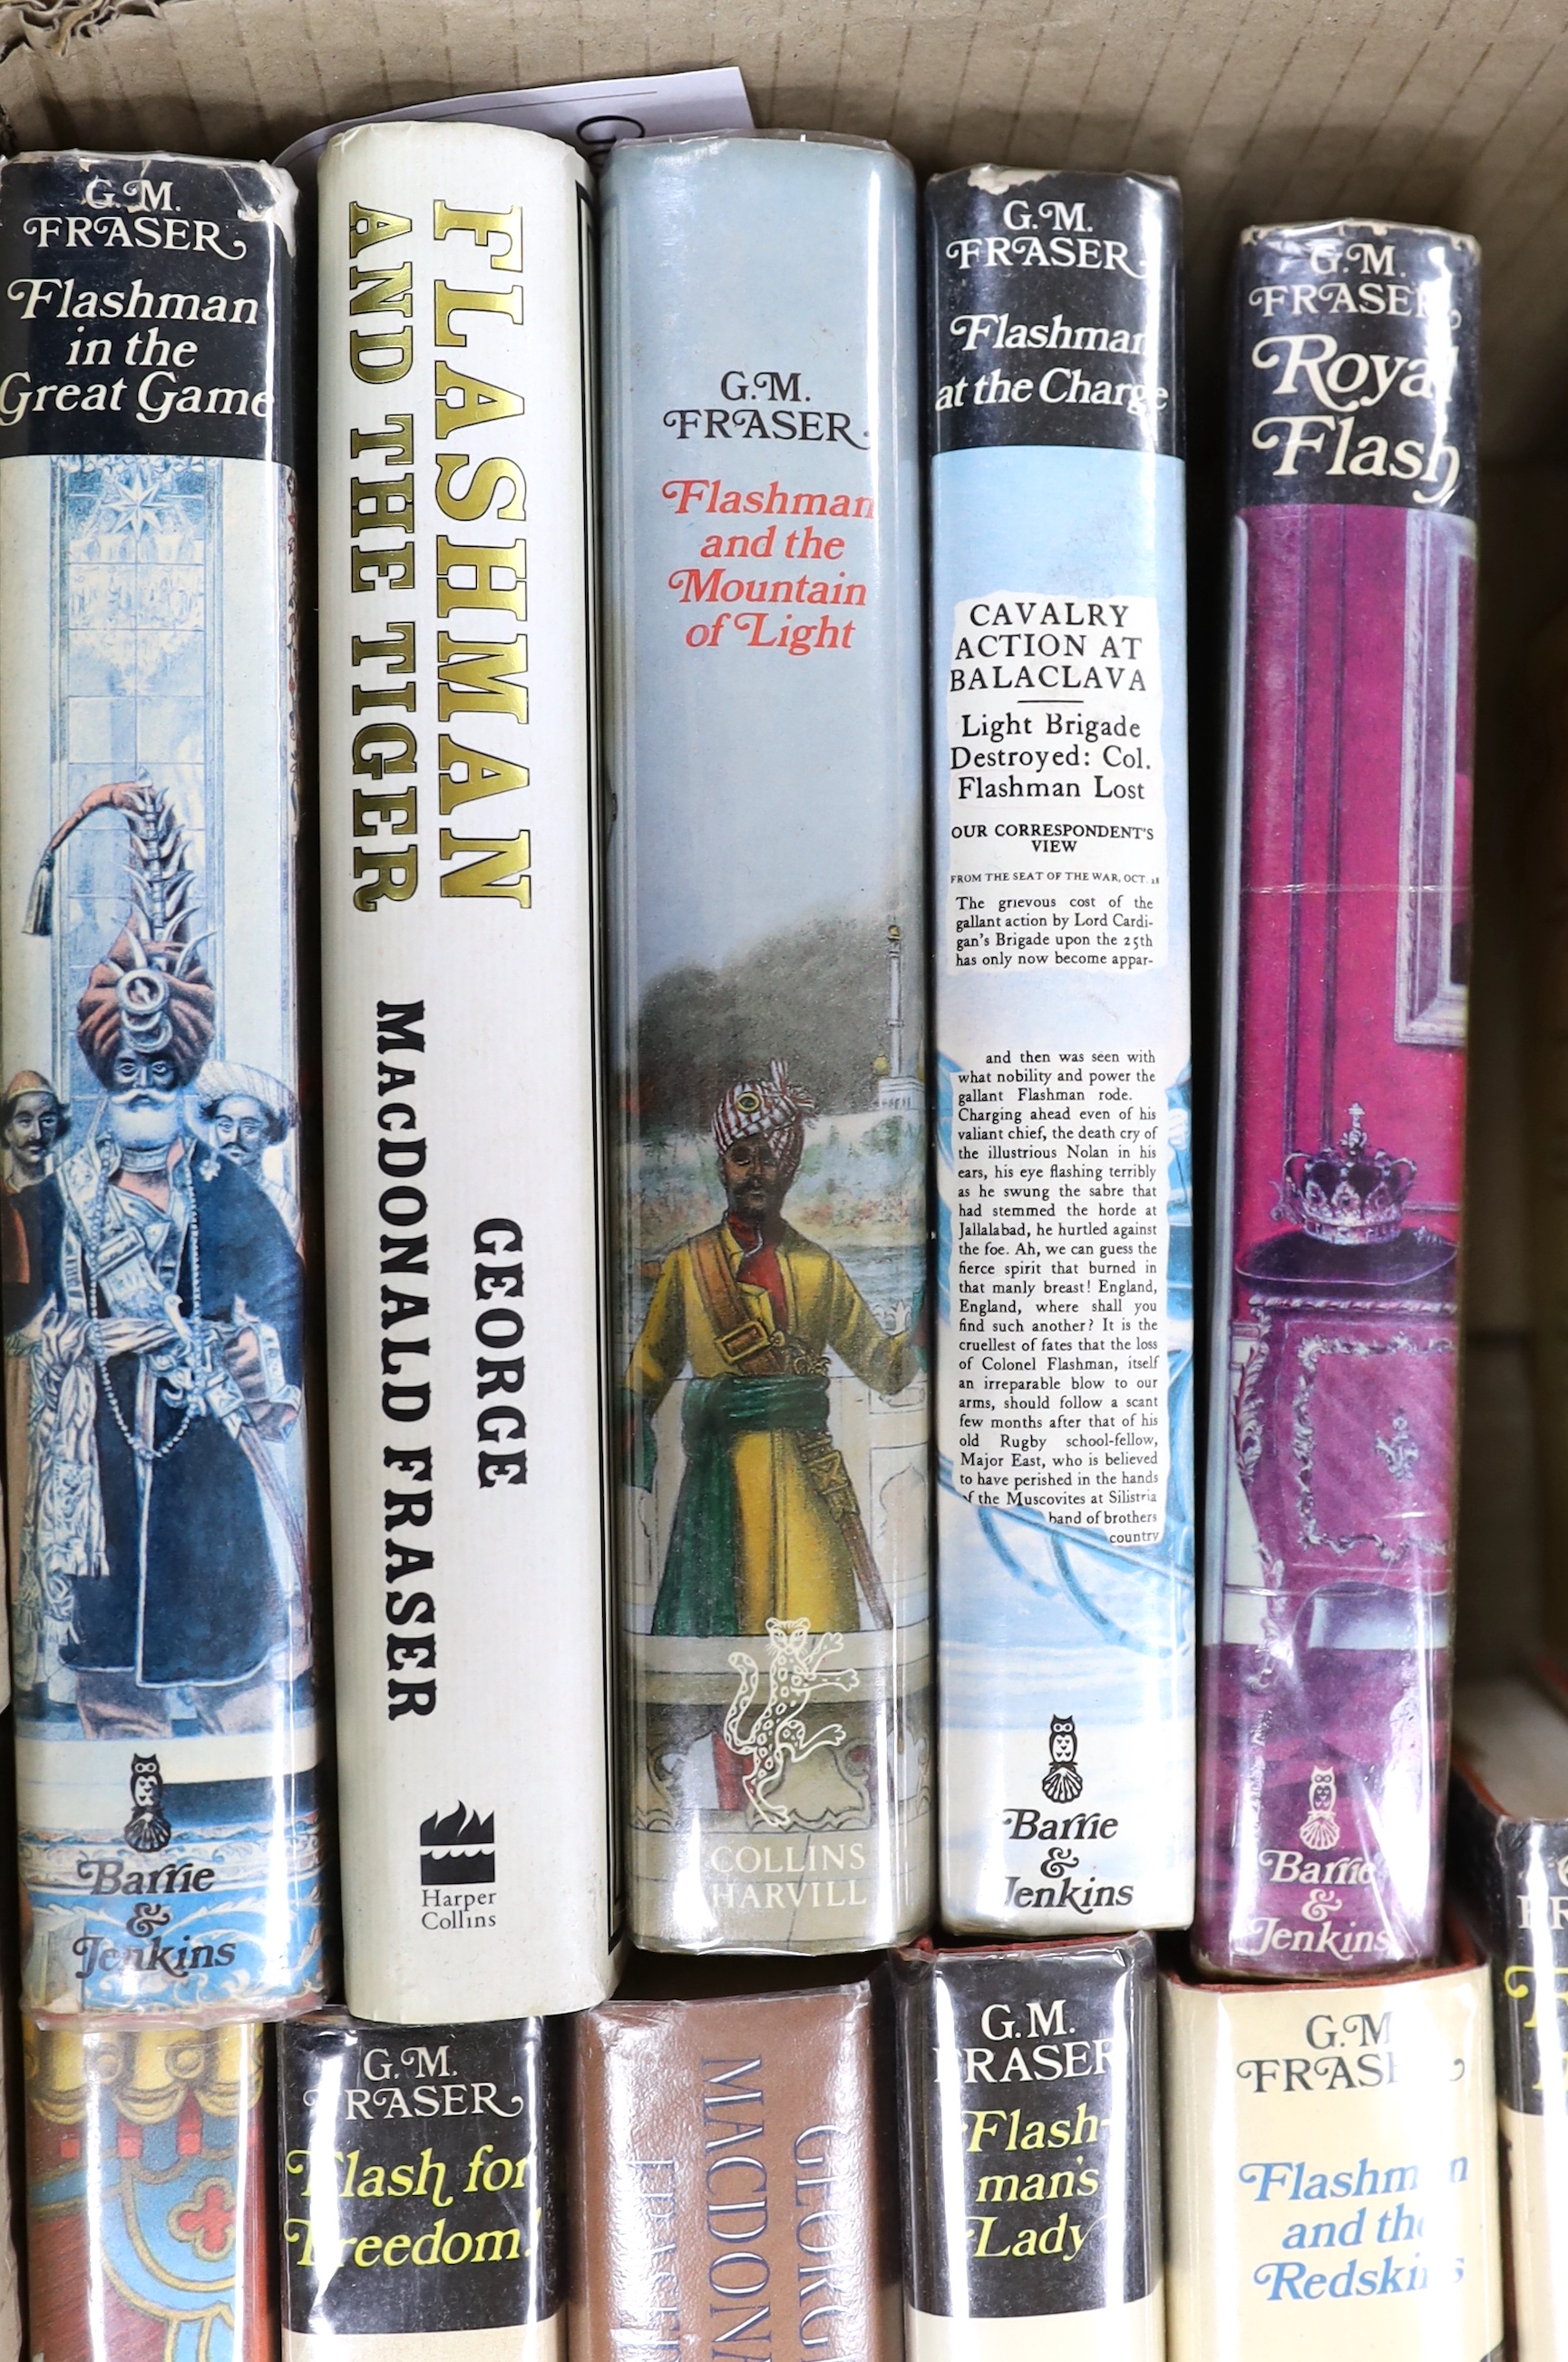 Fraser, George MacDonald - A complete set of The Flashman Papers, all 1st editions, all with dust jackets, consisting:- Flashman, 1969; Royal Flash, 1970; Flash for Freedom, 1971; Flashman at the Charge, 1973; Flashman a